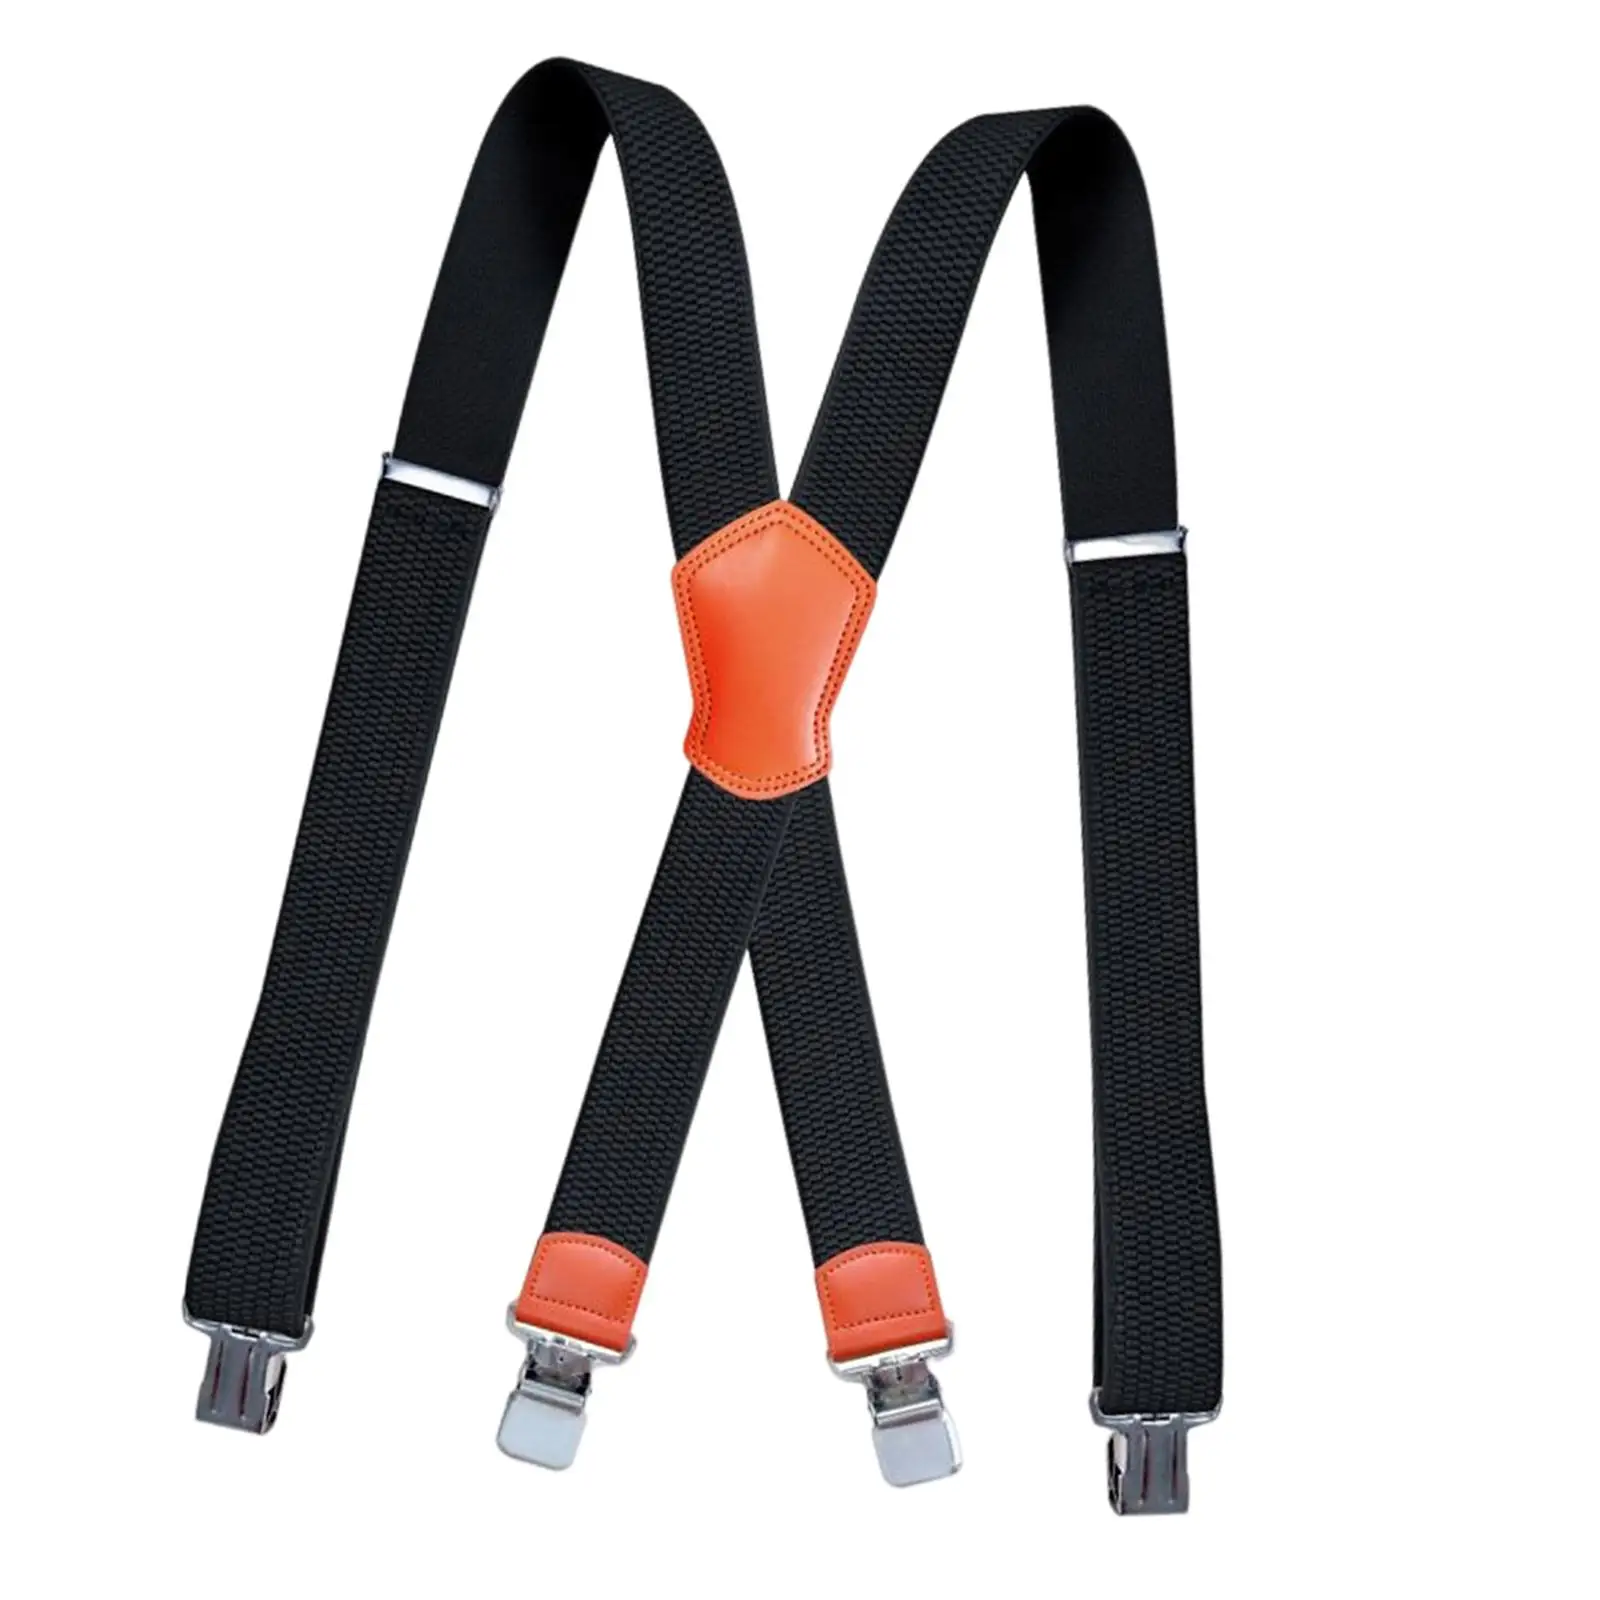 38mm Wide Men Suspenders High Elastic Adjustable Strong Clips Suspender X Shaped Trousers Braces